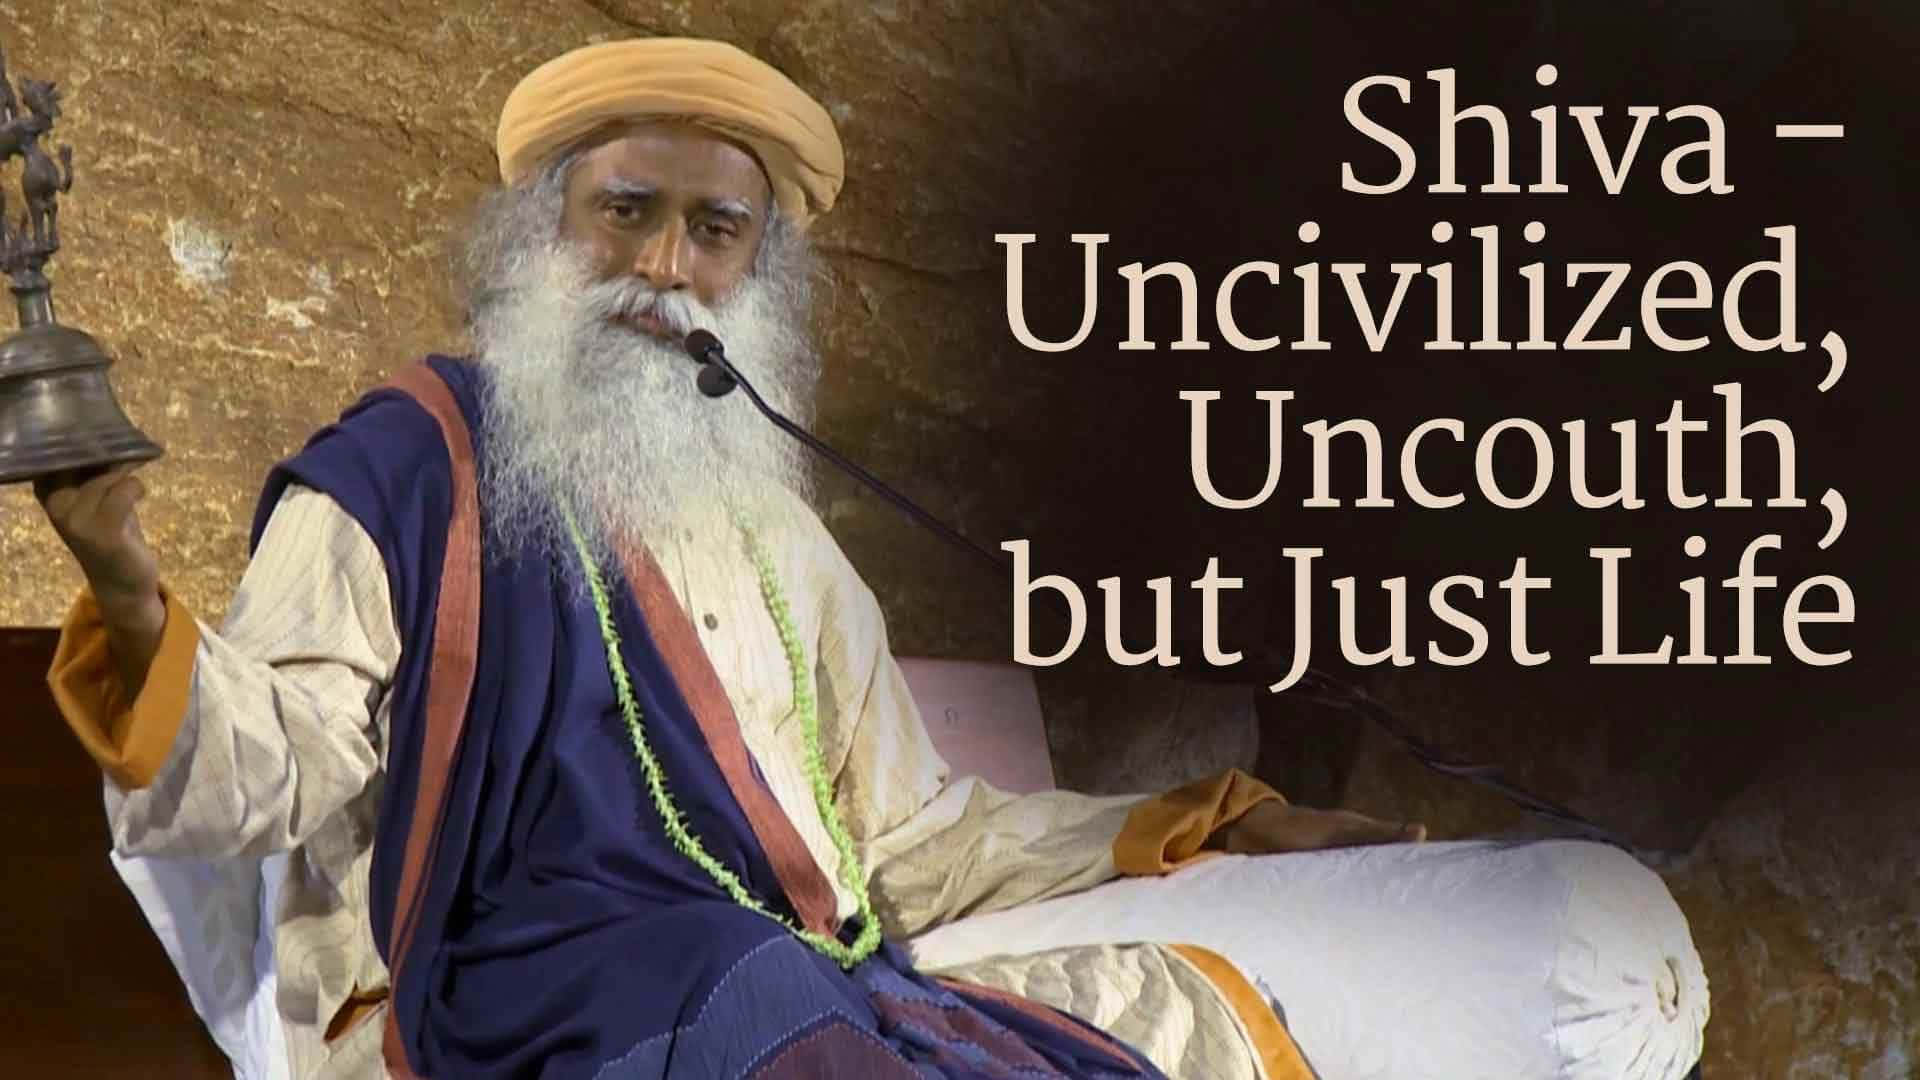 Sadhguru Quote About Uncouth Life Wallpaper